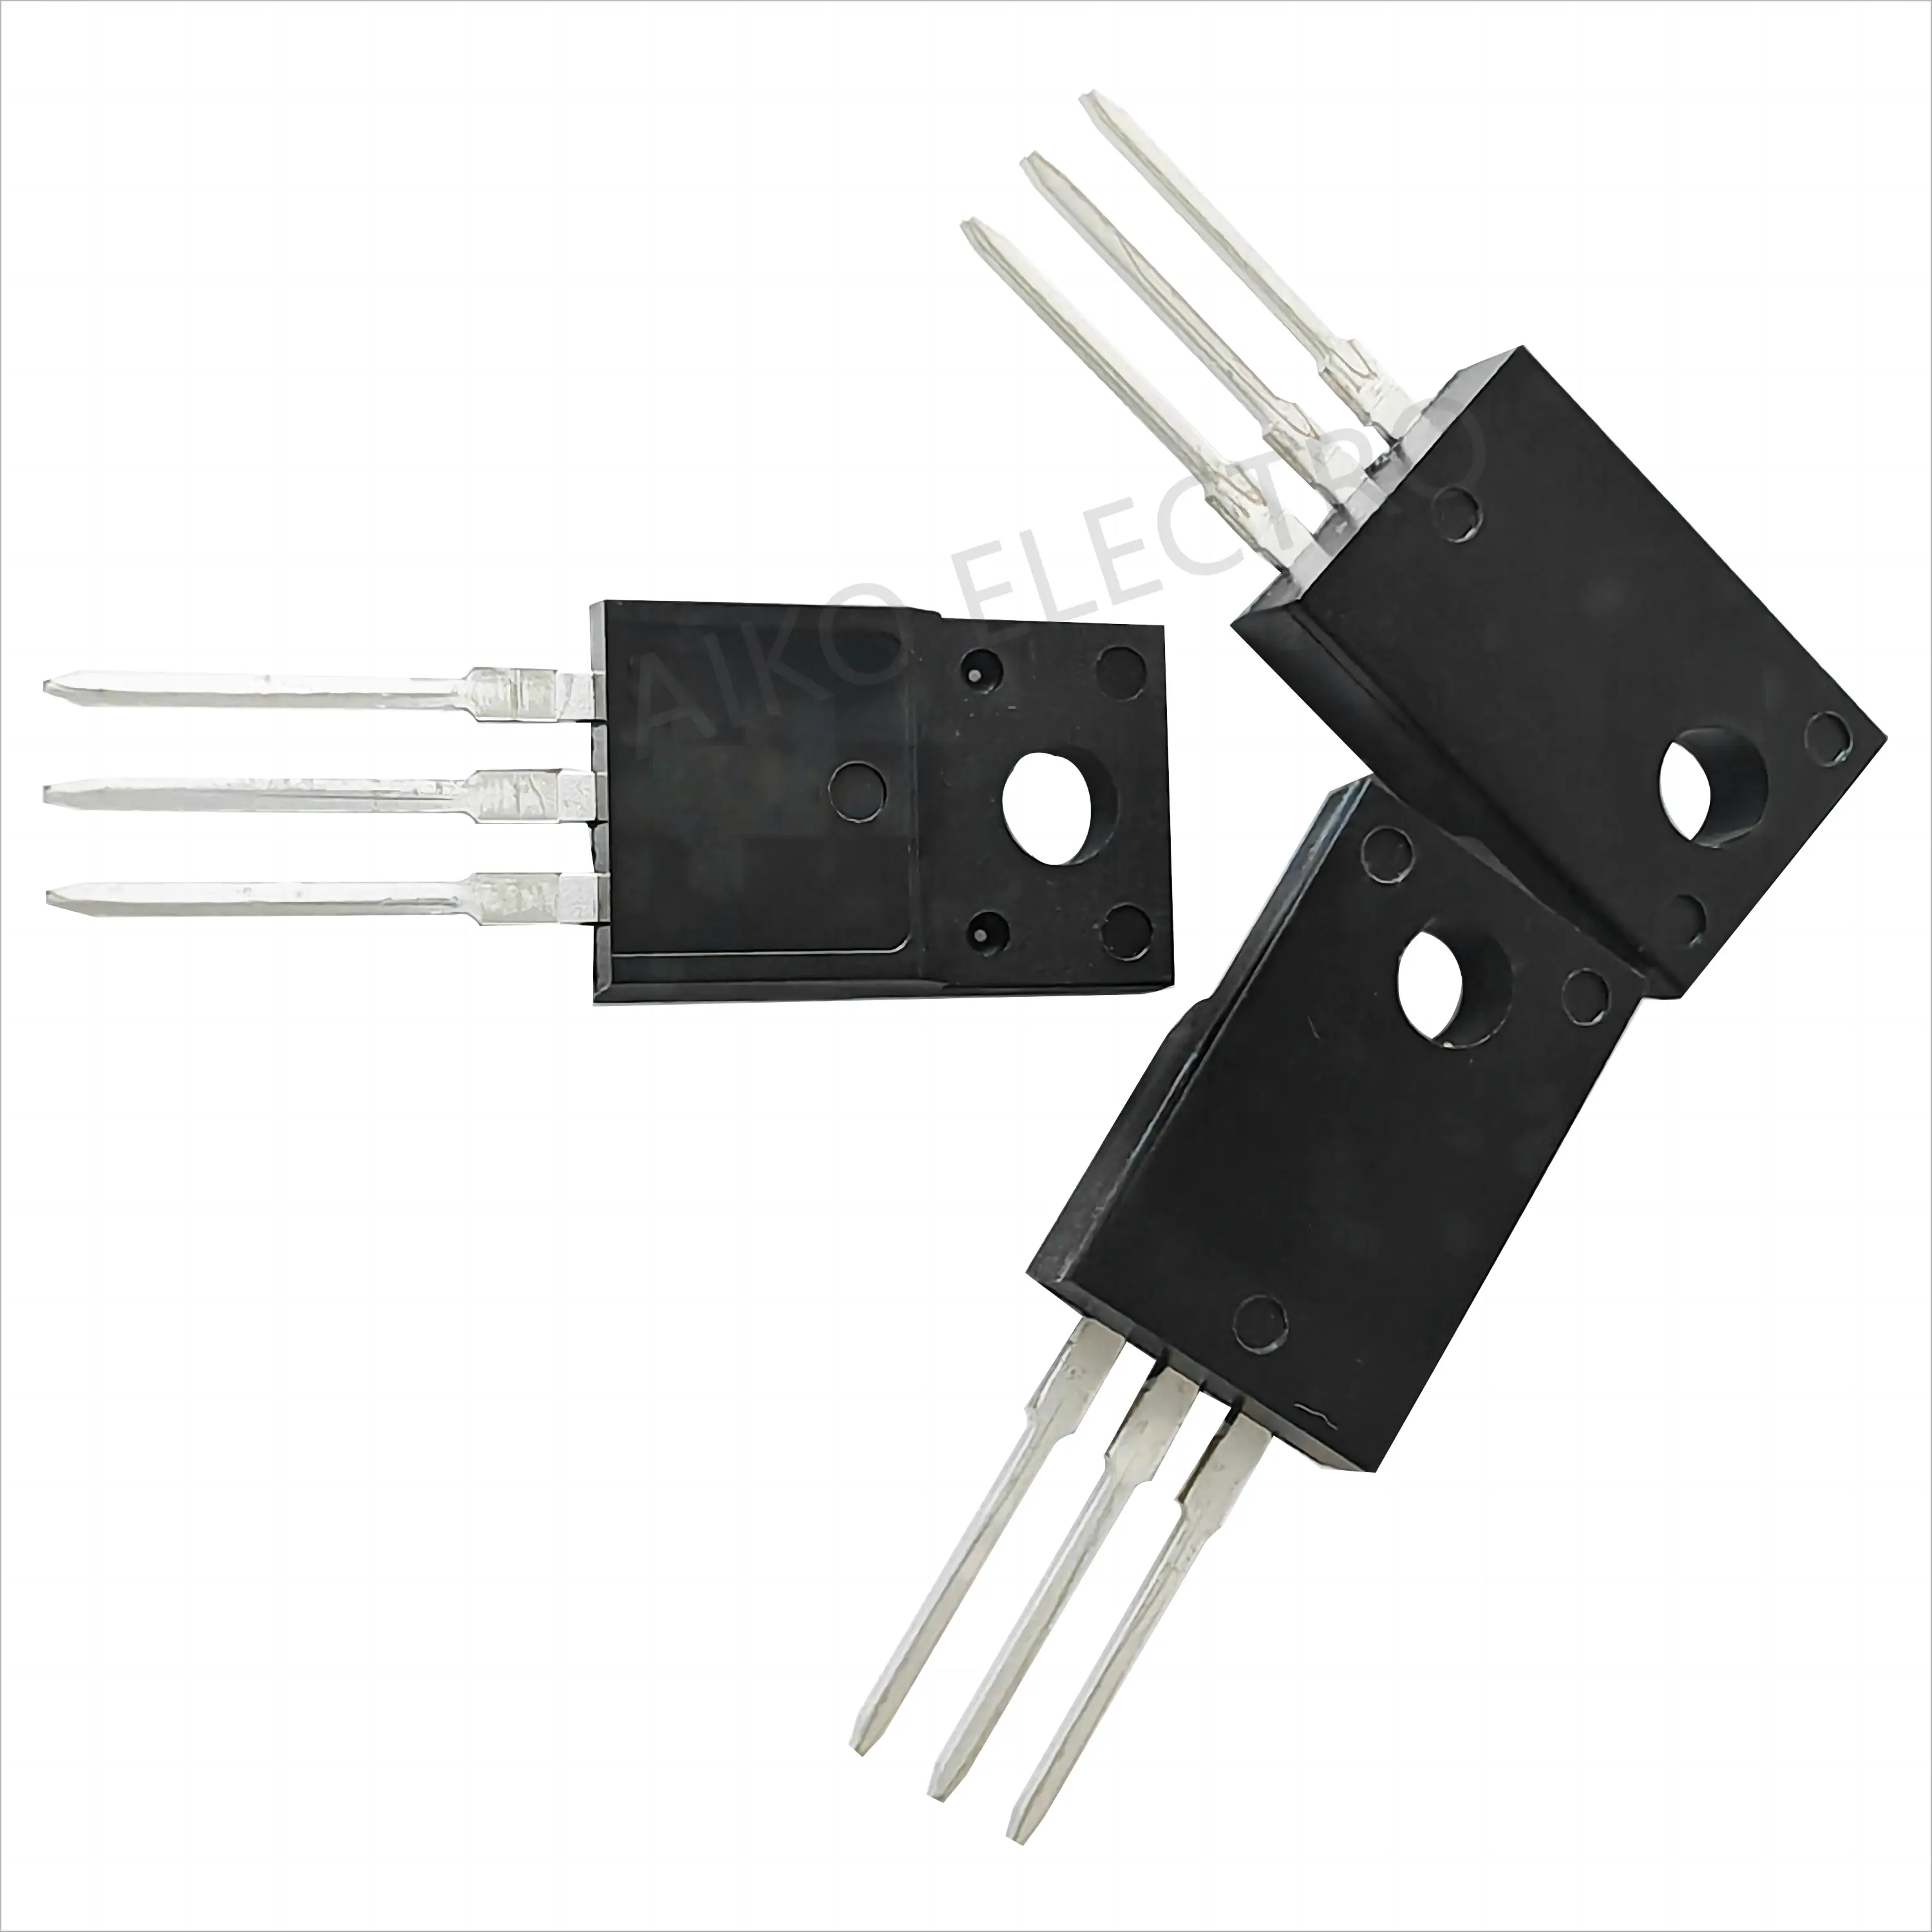 650V 7A N-Channel Power MOSFET Transistor With Low Gate Charge For Mobile Phone Charger Adapters